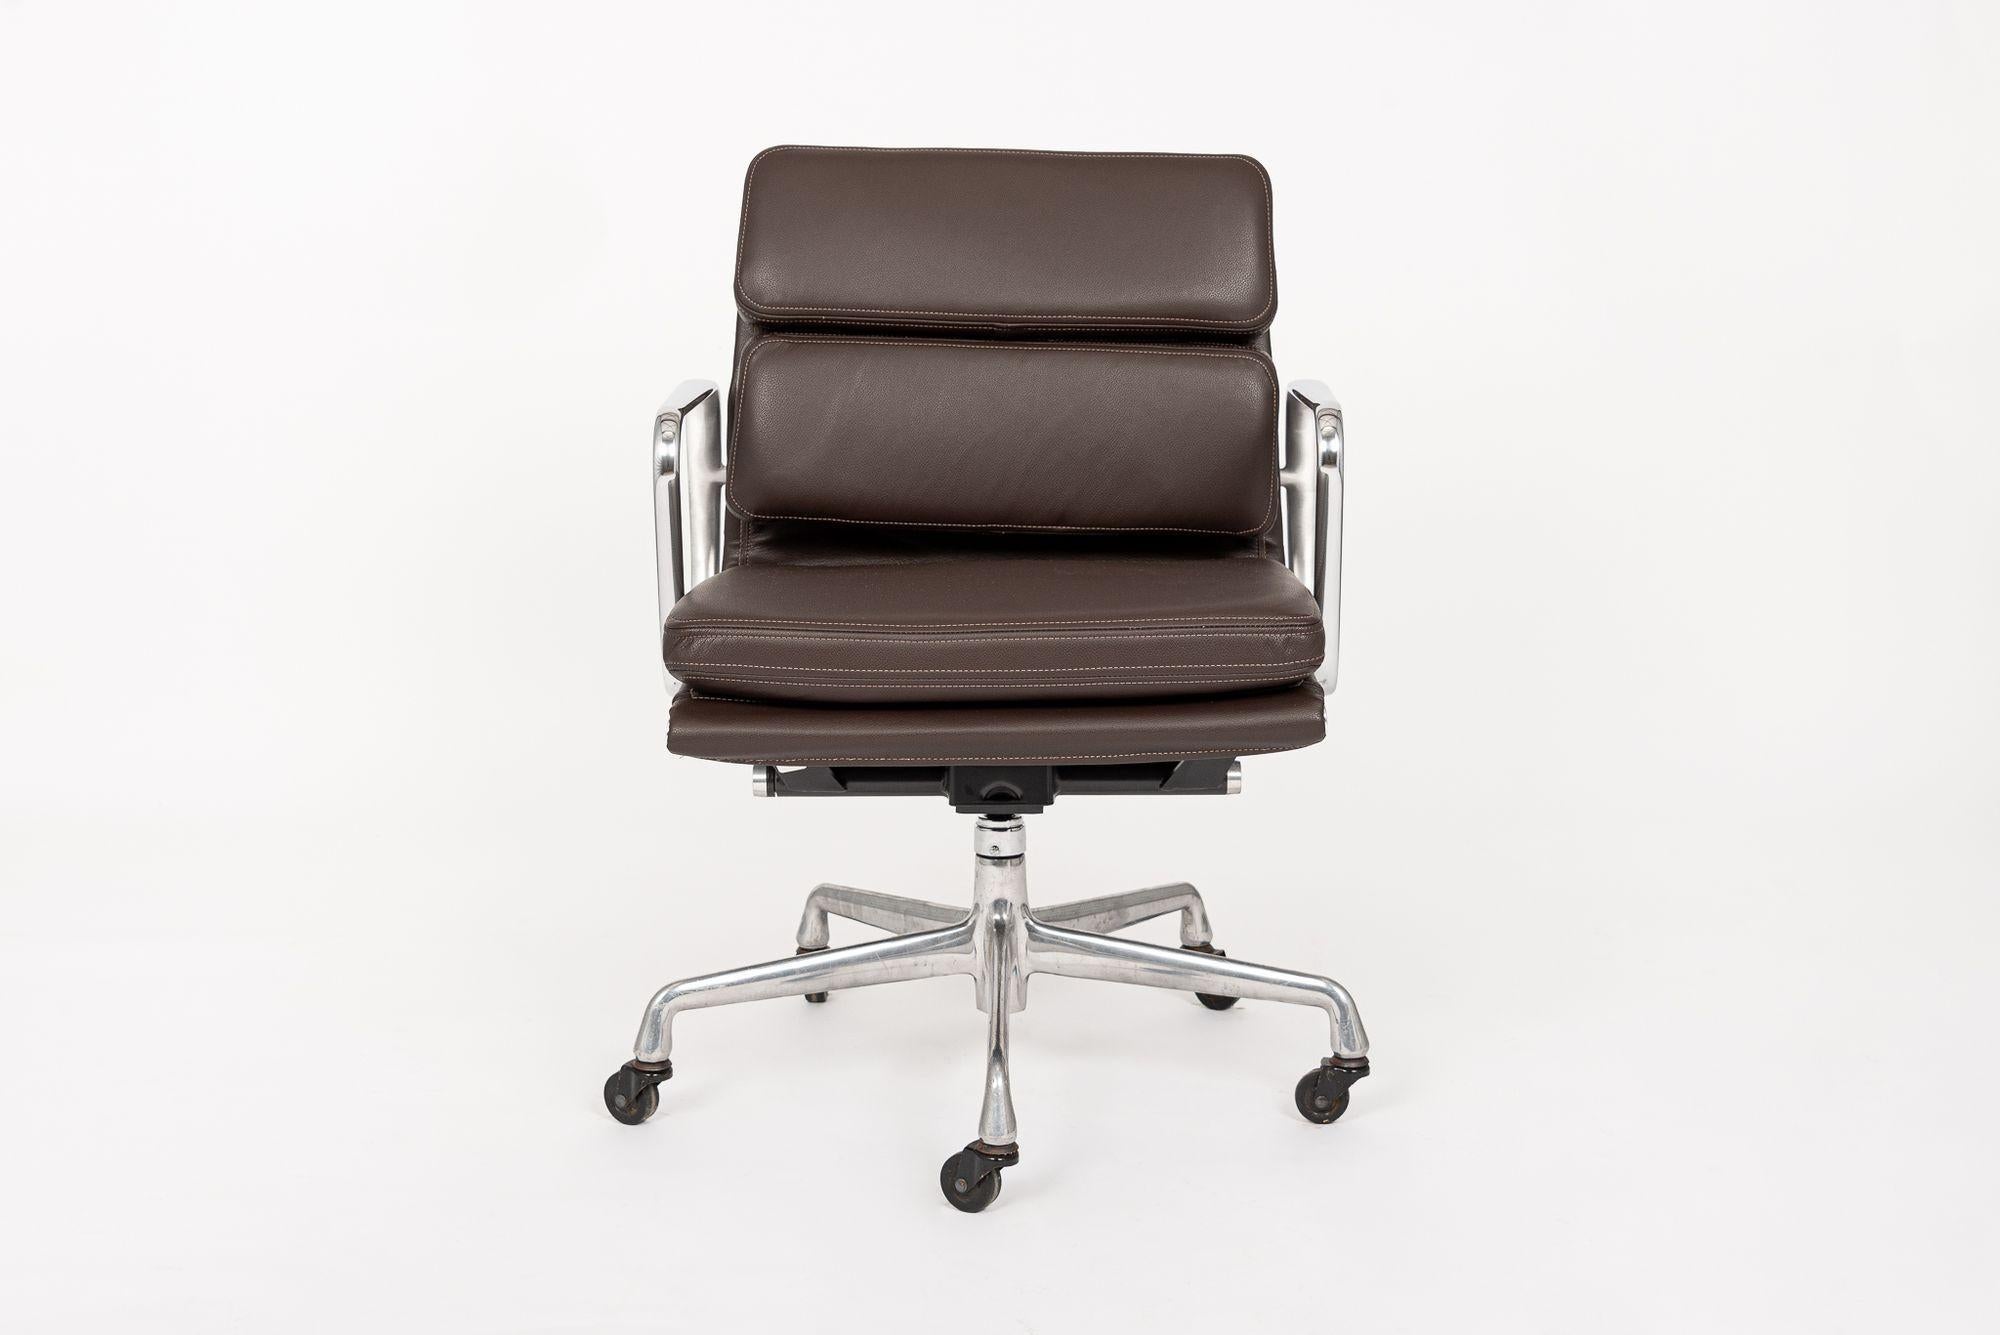 American Herman Miller Eames Dark Brown Leather Desk Chair Soft Pad For Sale